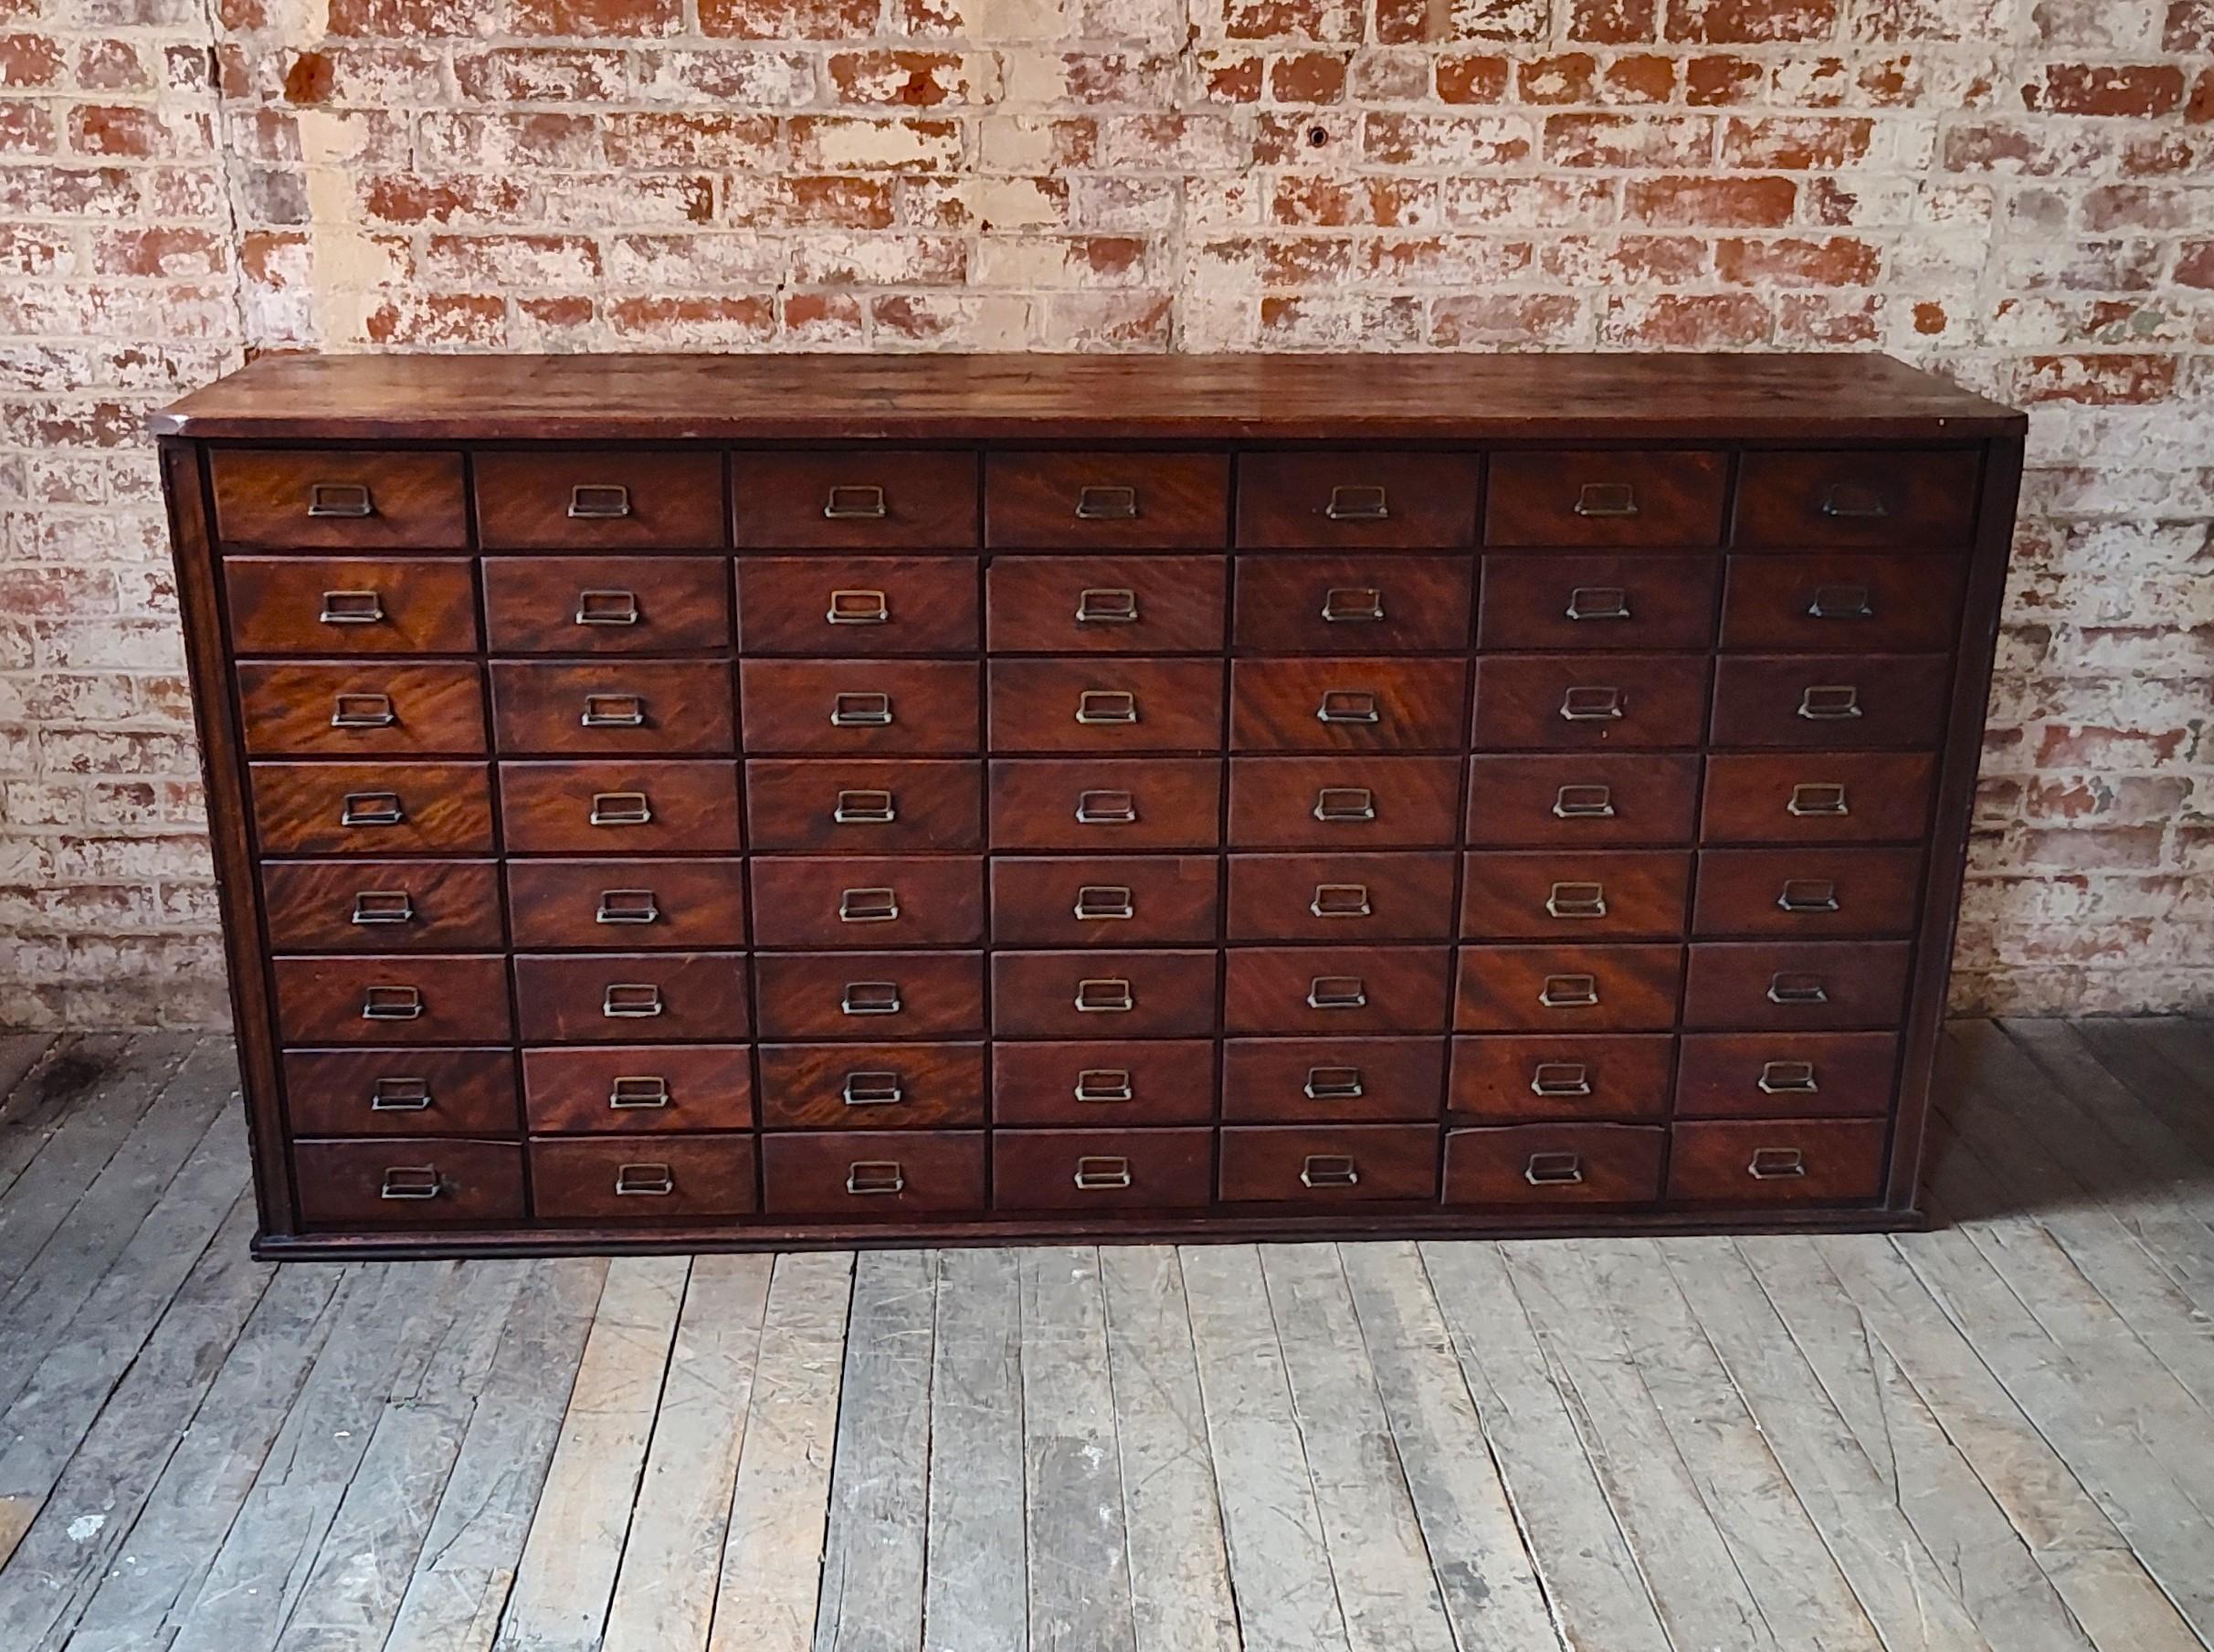 Apothecary Cabinet with 56 Drawers

Overall Dimensions: 18 1/2